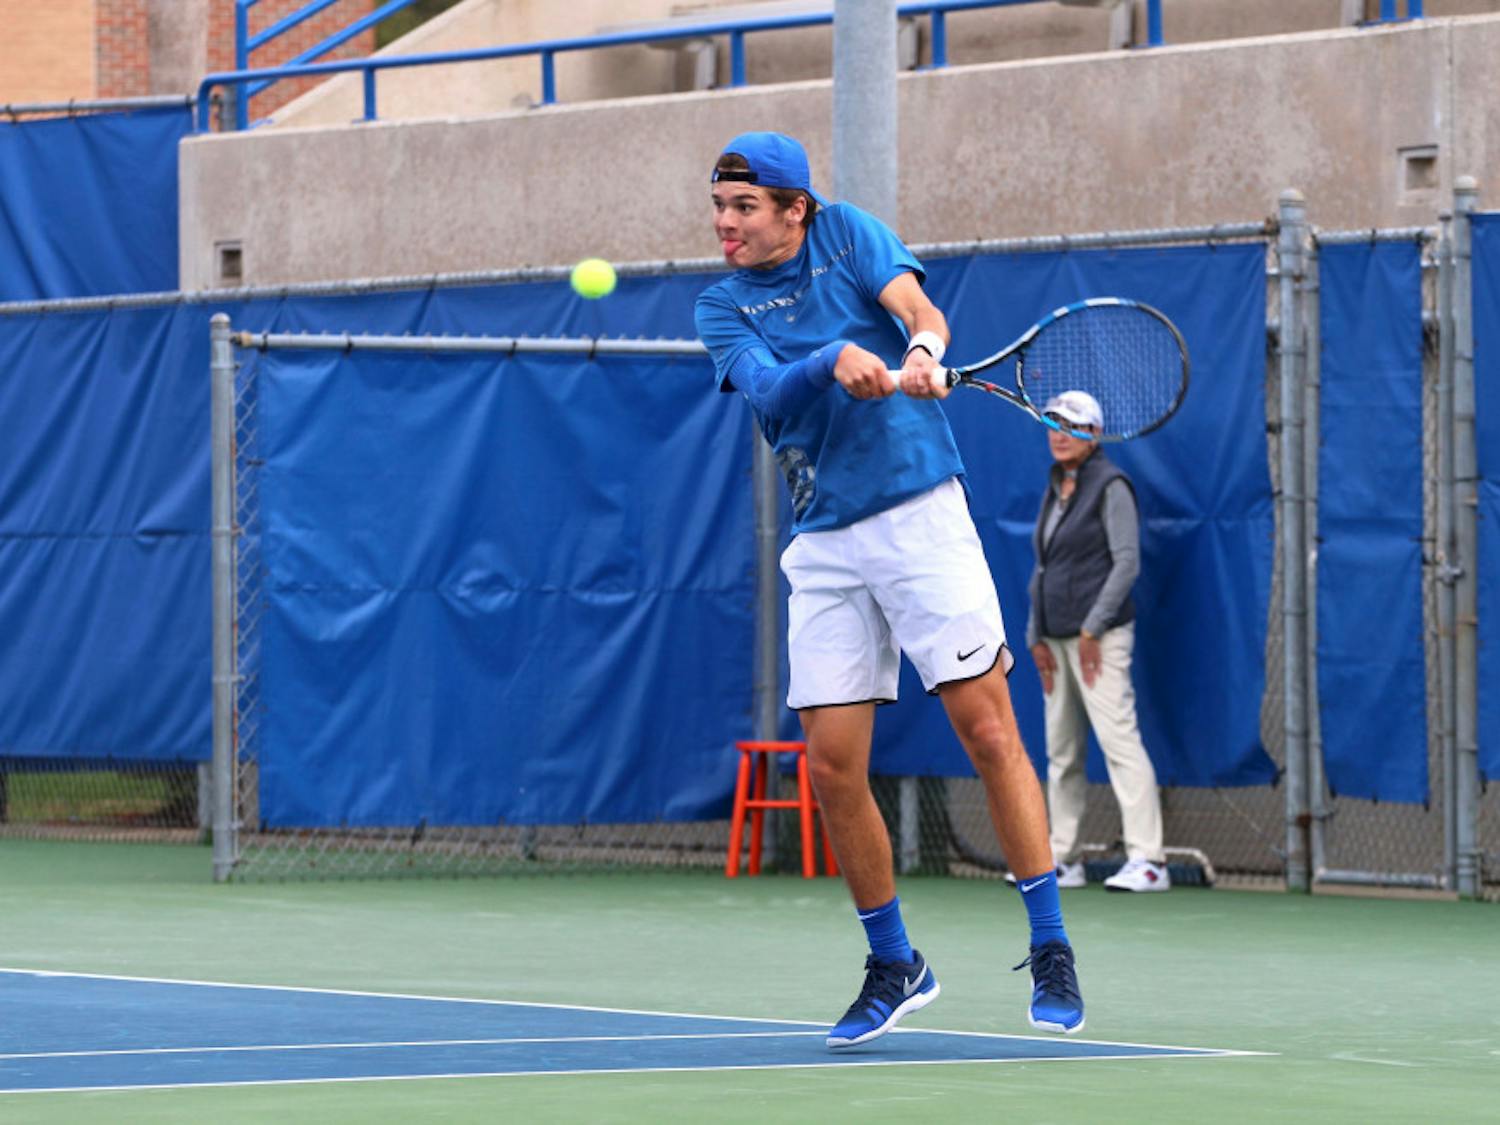 Senior McClain Kessler wrapped up his fall season with a doubles loss in the Round of 16 at the Dick Vitale Clay Court Classic. 